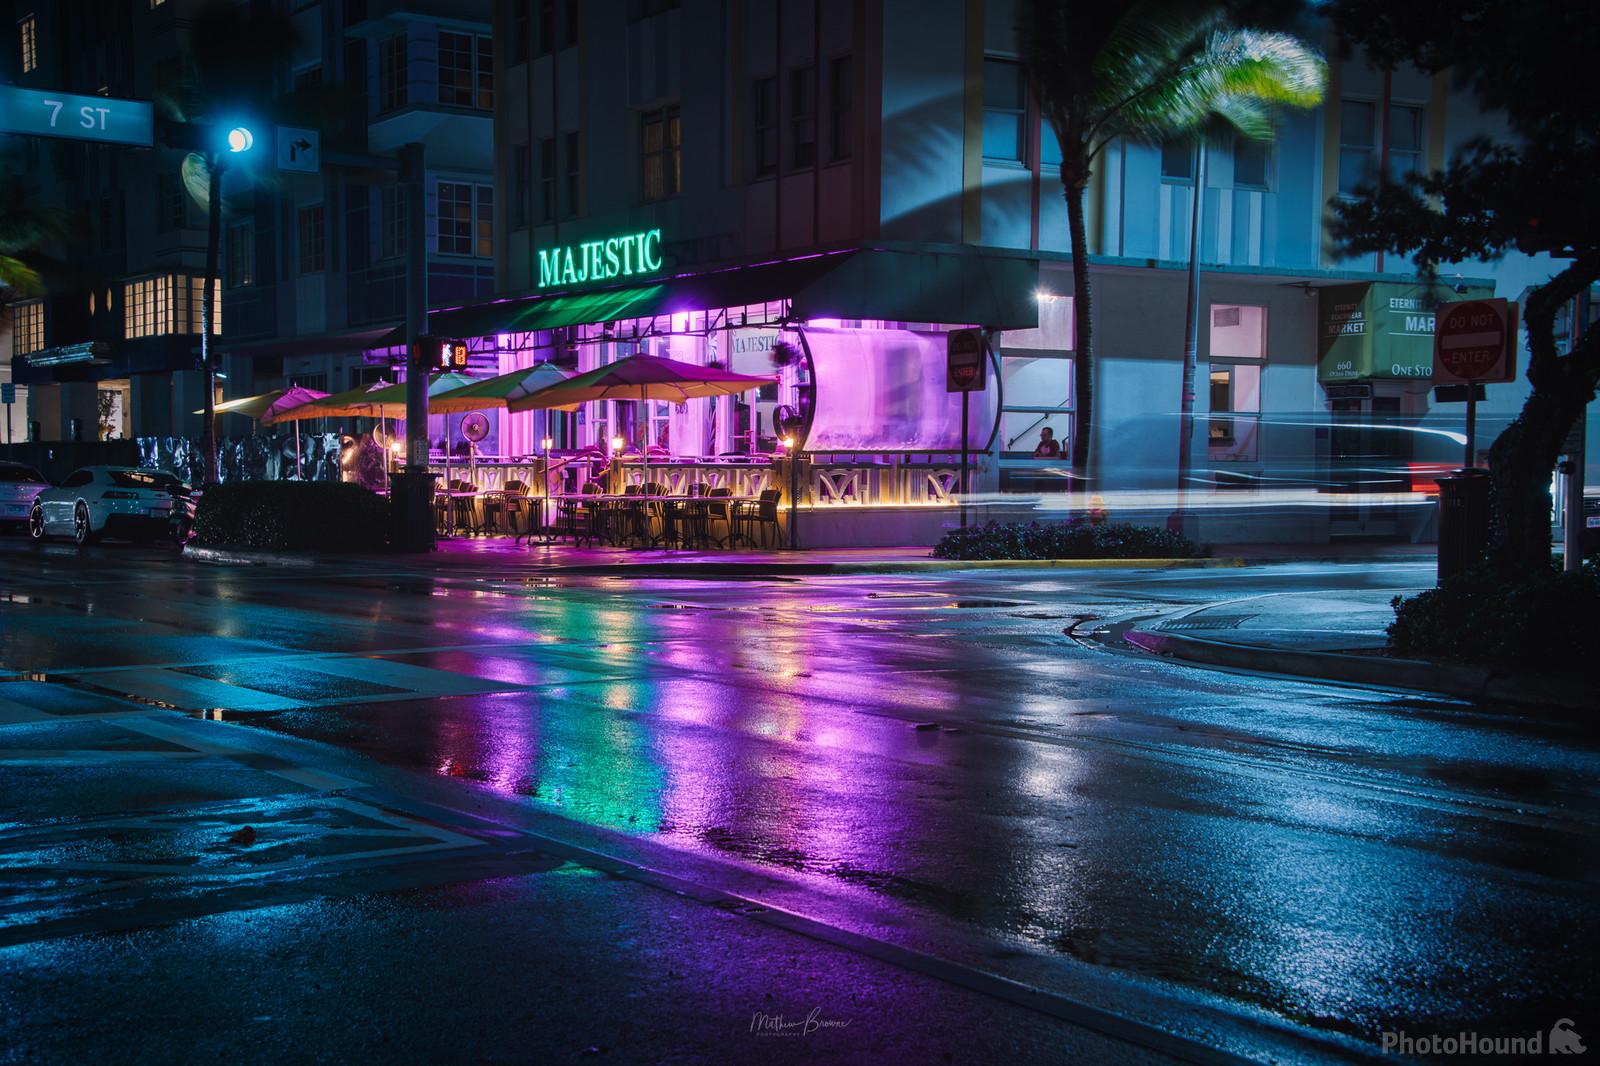 Image of Majestic Hotel by Mathew Browne